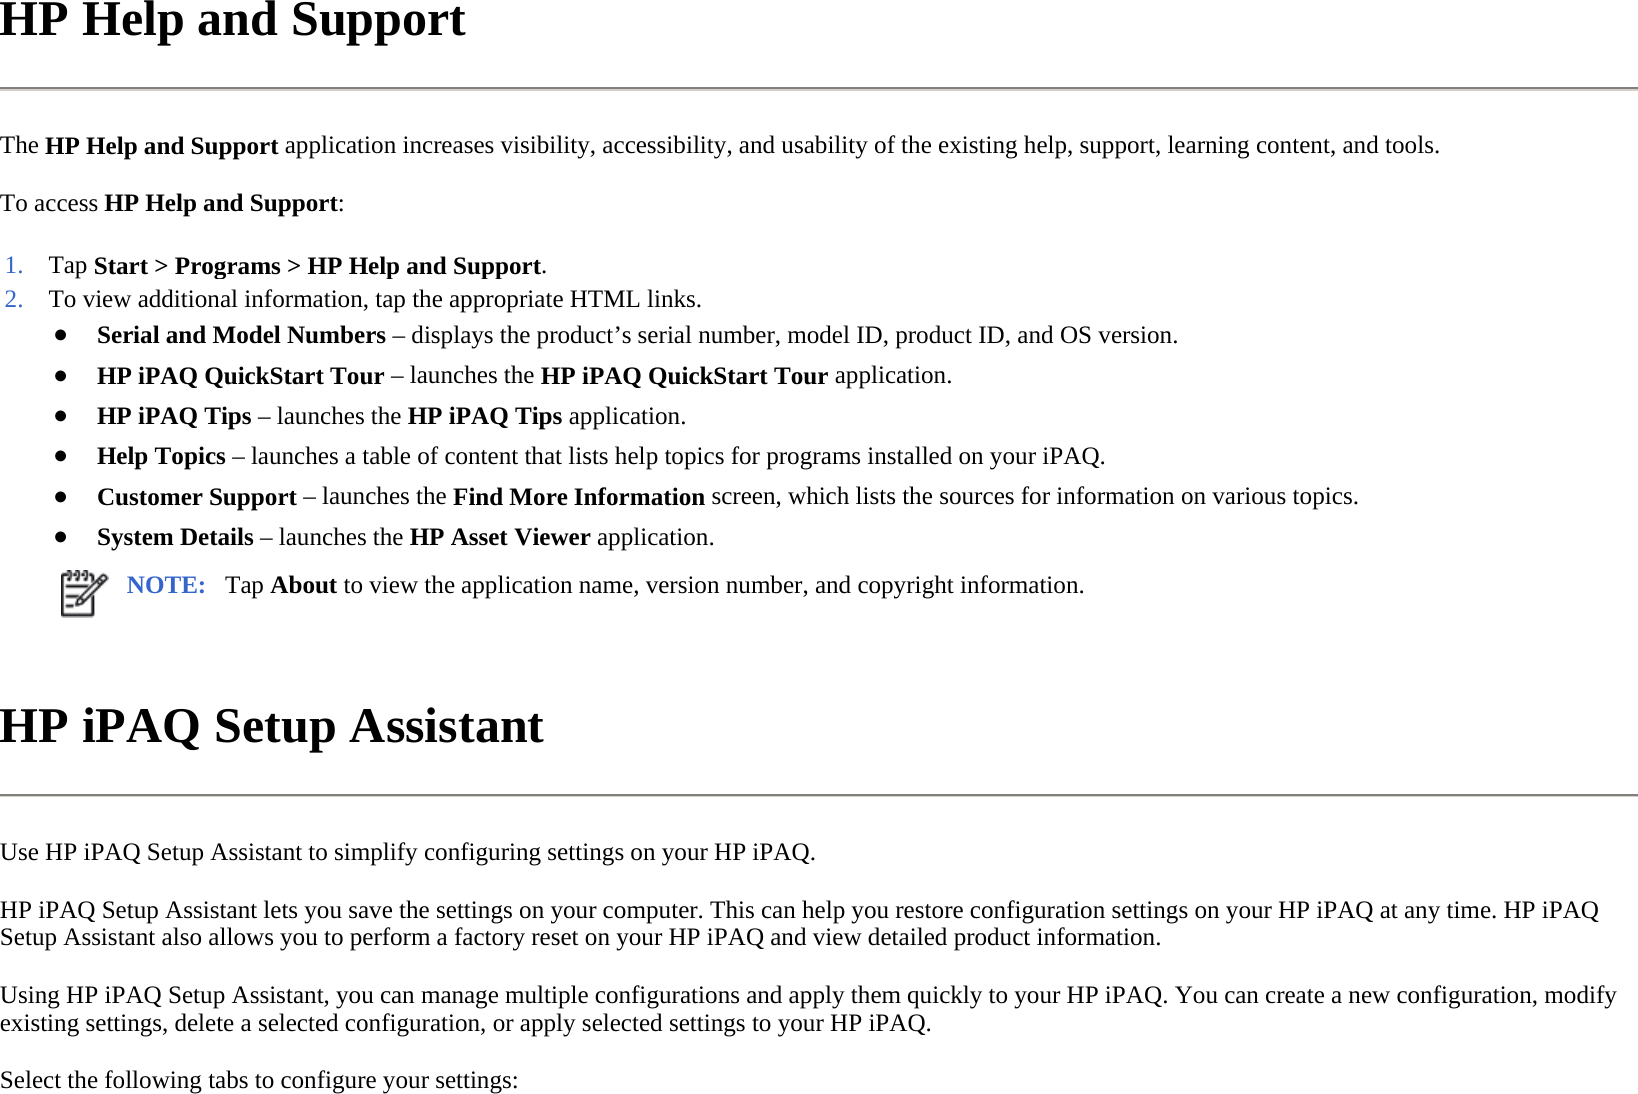 HP Help and Support  The HP Help and Support application increases visibility, accessibility, and usability of the existing help, support, learning content, and tools.  To access HP Help and Support:  HP iPAQ Setup Assistant  Use HP iPAQ Setup Assistant to simplify configuring settings on your HP iPAQ.  HP iPAQ Setup Assistant lets you save the settings on your computer. This can help you restore configuration settings on your HP iPAQ at any time. HP iPAQ Setup Assistant also allows you to perform a factory reset on your HP iPAQ and view detailed product information.  Using HP iPAQ Setup Assistant, you can manage multiple configurations and apply them quickly to your HP iPAQ. You can create a new configuration, modify existing settings, delete a selected configuration, or apply selected settings to your HP iPAQ.  Select the following tabs to configure your settings:1. Tap Start &gt; Programs &gt;HP Help and Support.2. To view additional information, tap the appropriate HTML links.●Serial and Model Numbers – displays the product’s serial number, model ID, product ID, and OS version.●HP iPAQ QuickStart Tour – launches the HP iPAQ QuickStart Tour application. ●HP iPAQ Tips–launches the HP iPAQ Tipsapplication.●Help Topics–launches a table of content that lists help topics for programs installed on your iPAQ.●Customer Support– launches the Find More Information screen, which lists the sources for information on various topics.●System Details–launches the HP Asset Viewer application.NOTE: Tap About to view the application name, version number, and copyright information. 